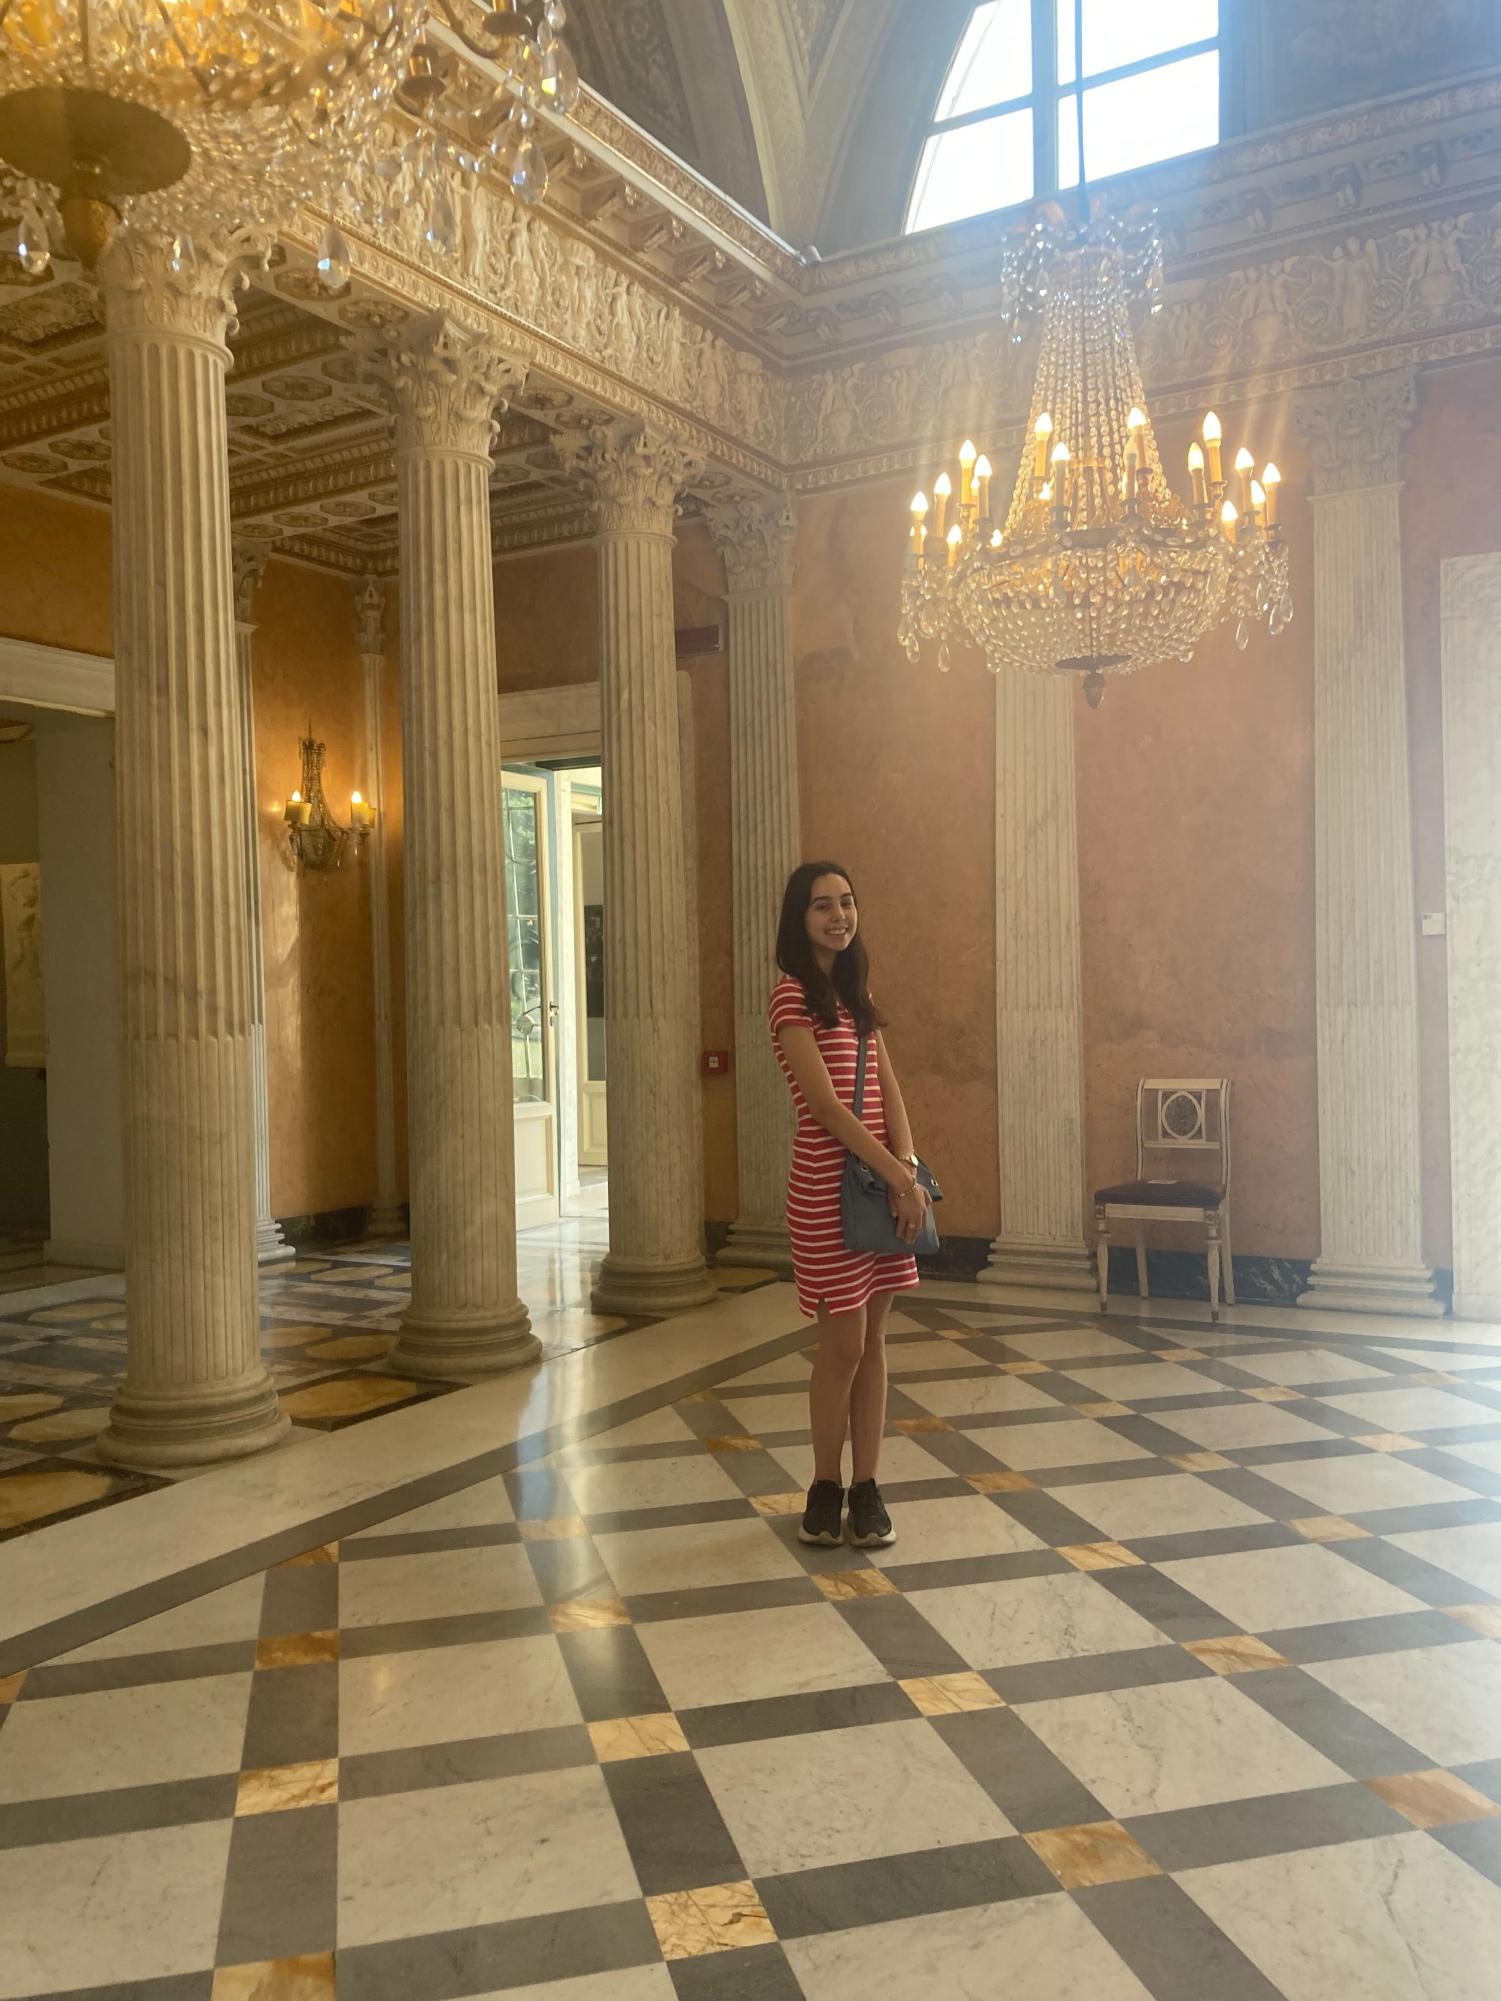 The author poses during a tour of Casino Nobile.